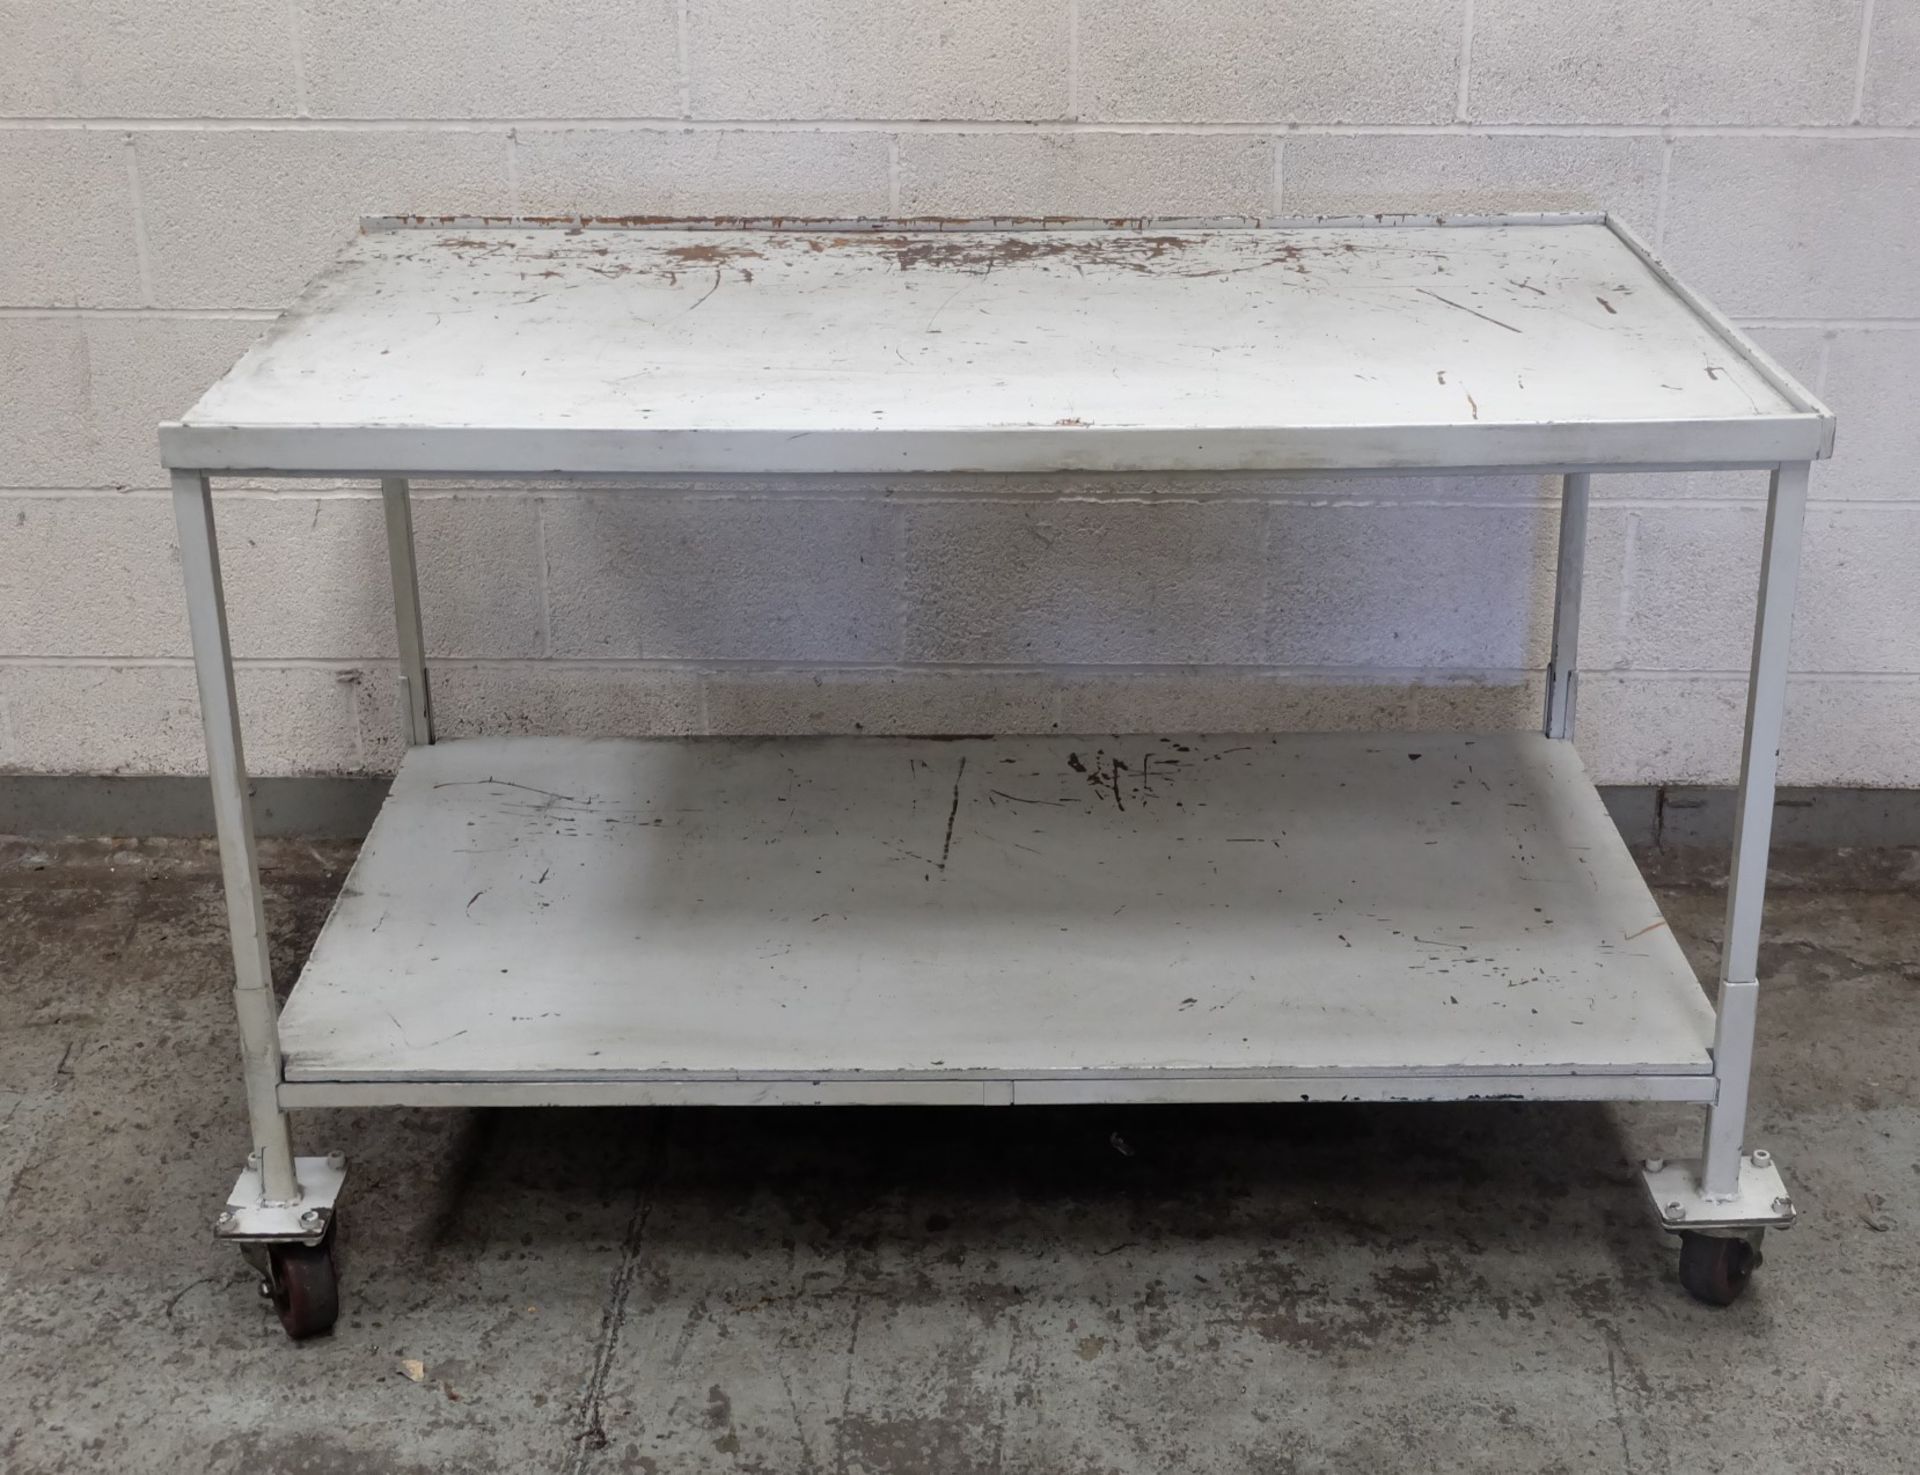 A Steel Framed Timber Top Mobile 2 tier Work Bench